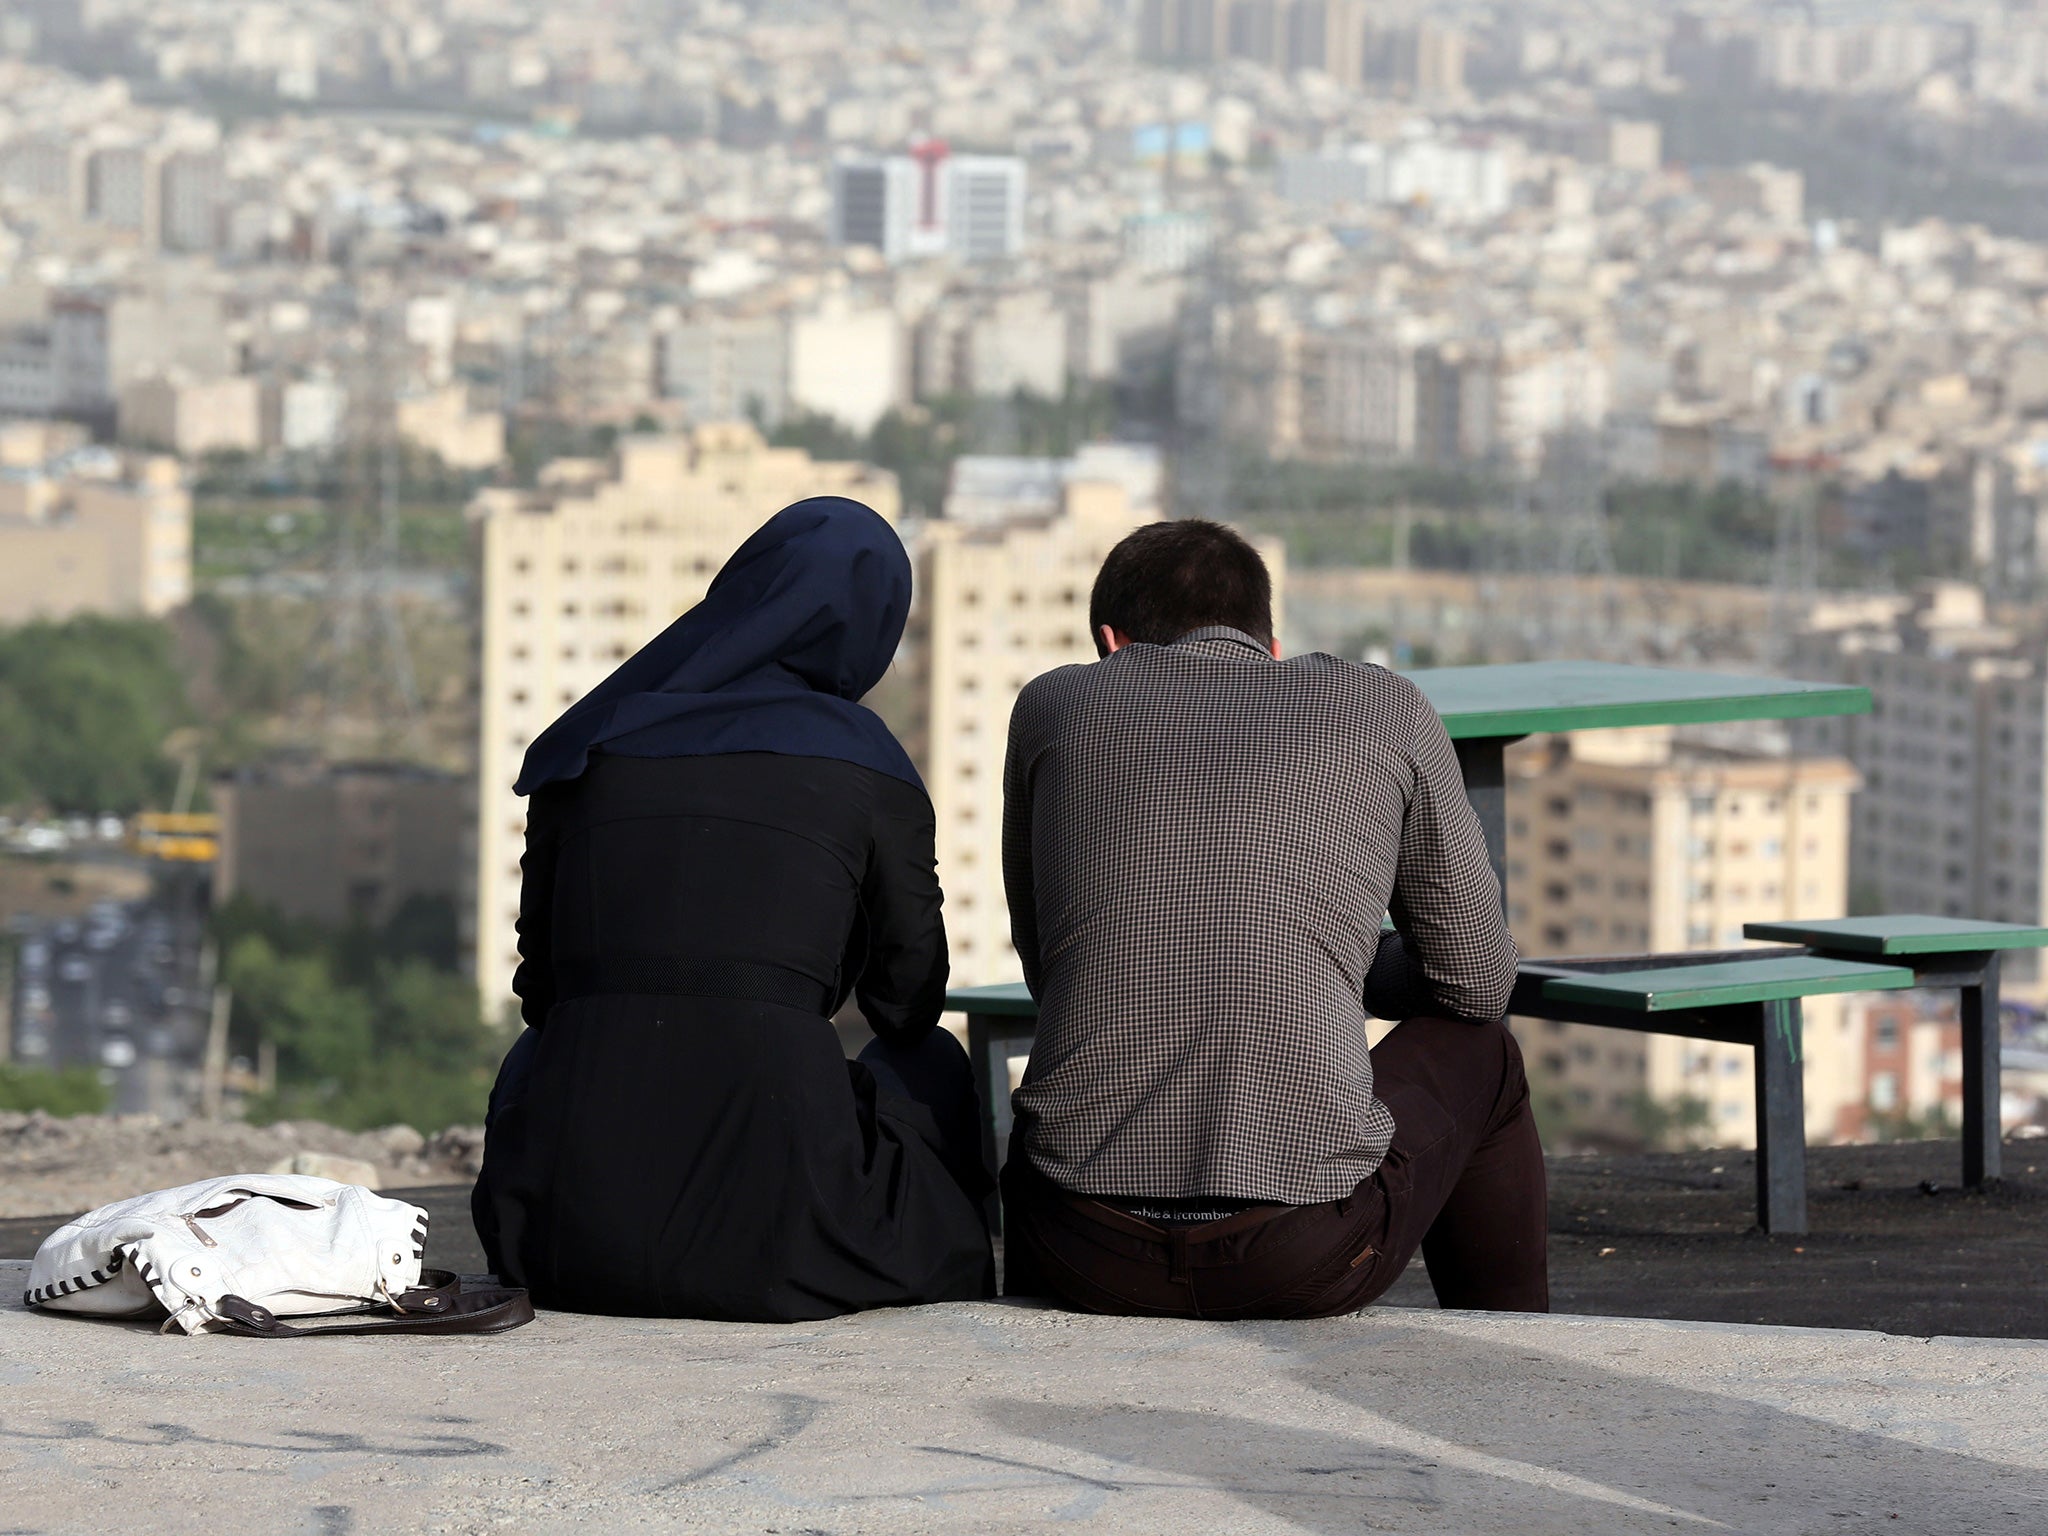 Iran has begun to encourage young people to marry and have more children